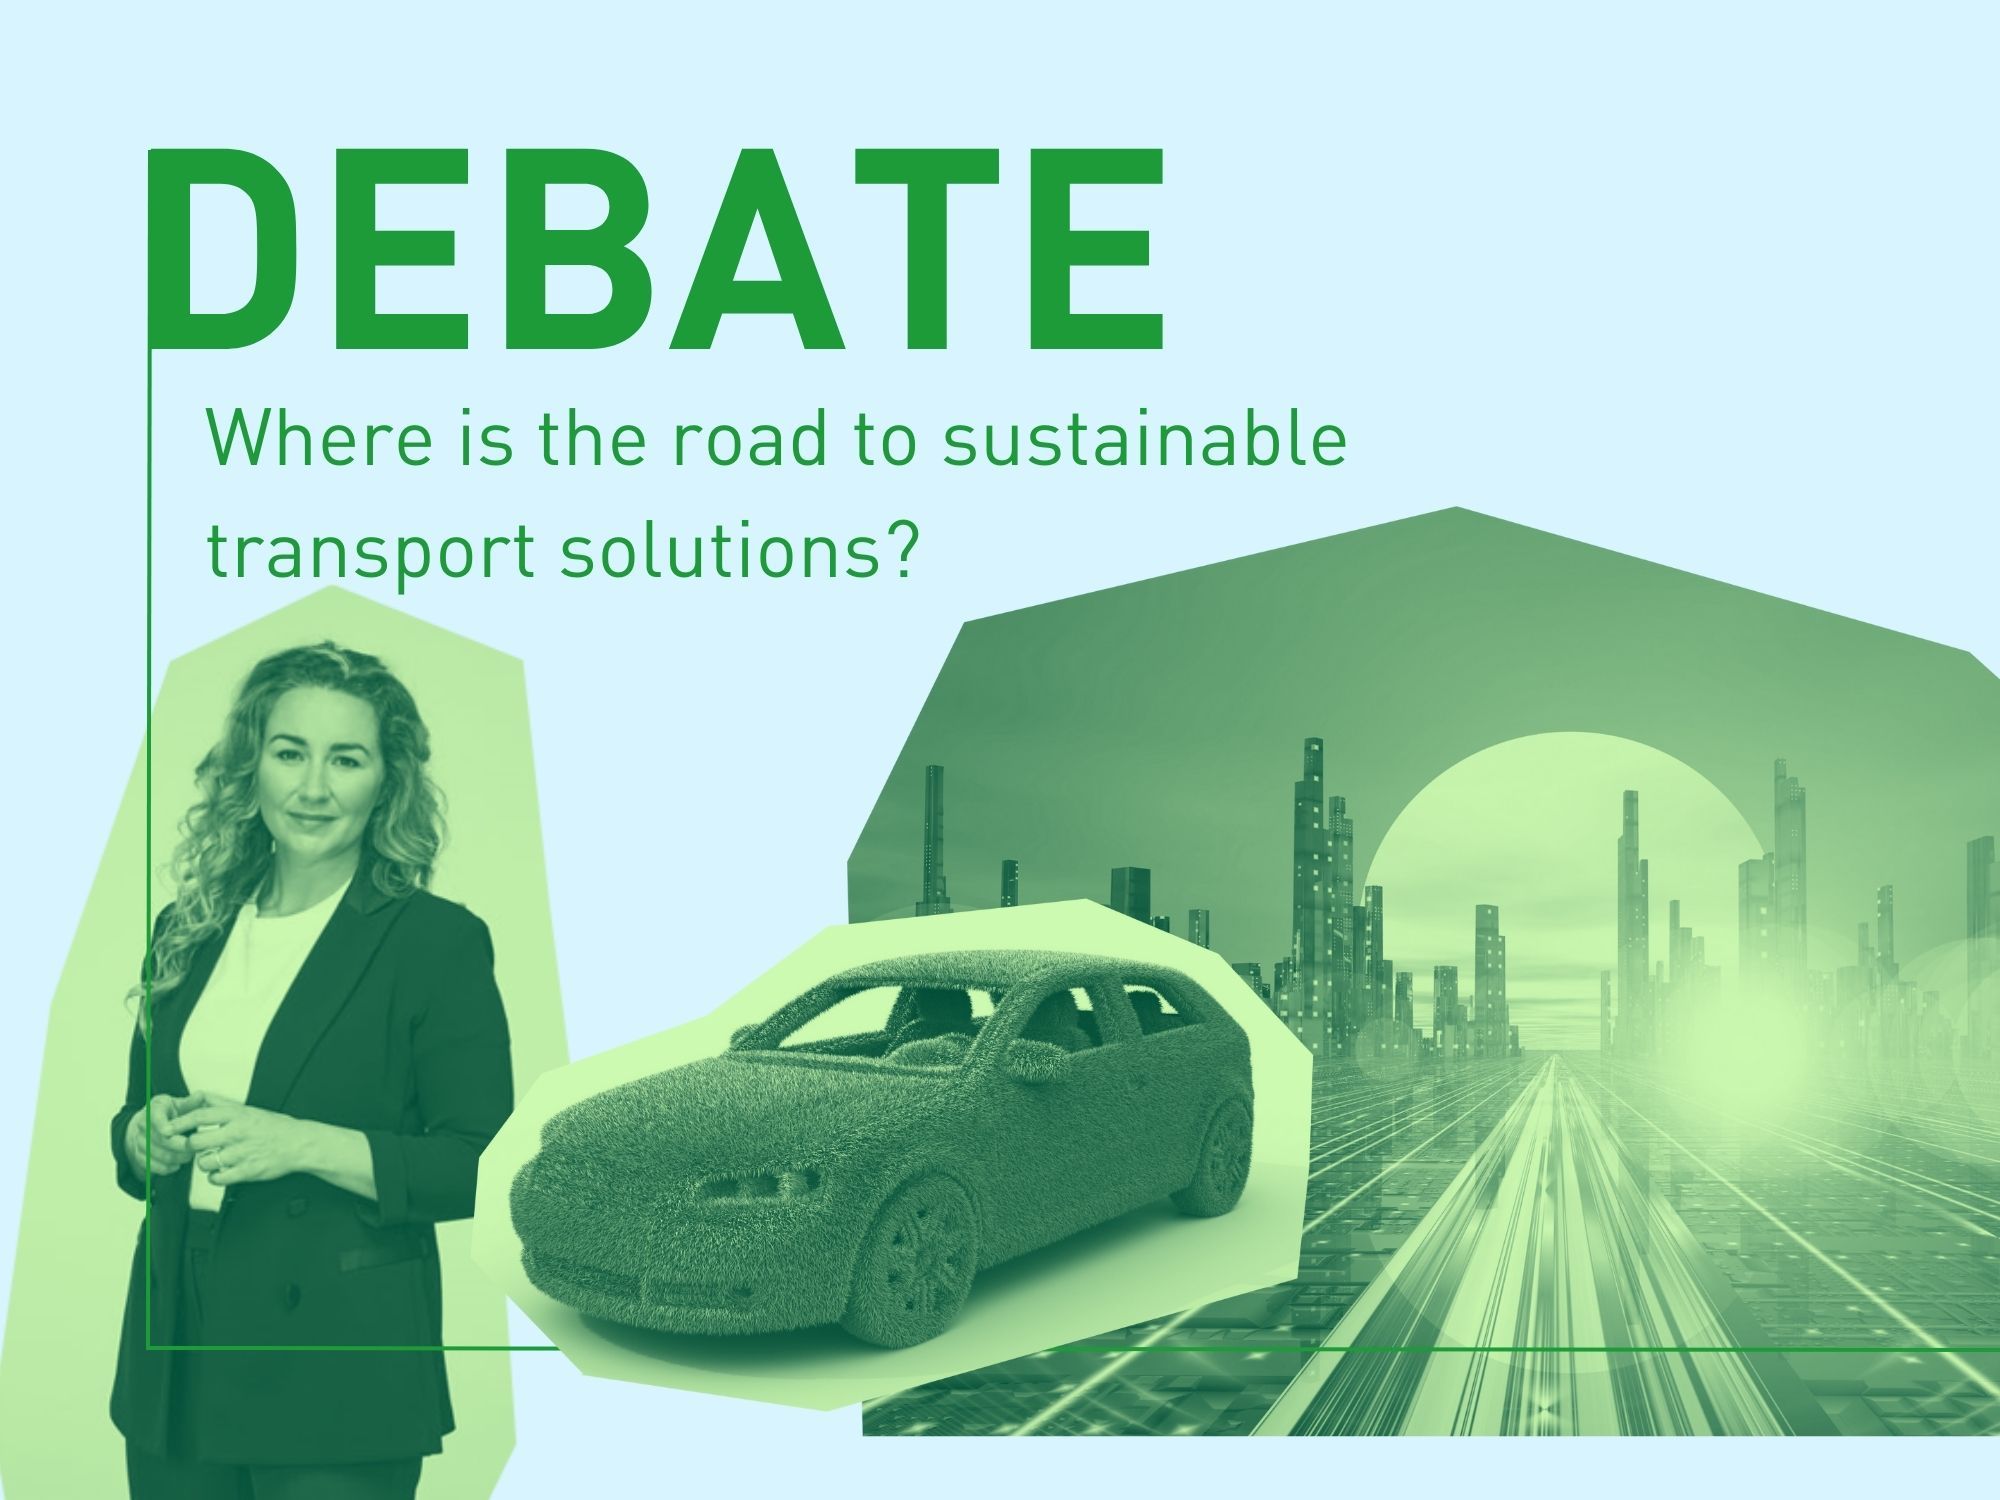 Where is the road to sustainable transport solutions?